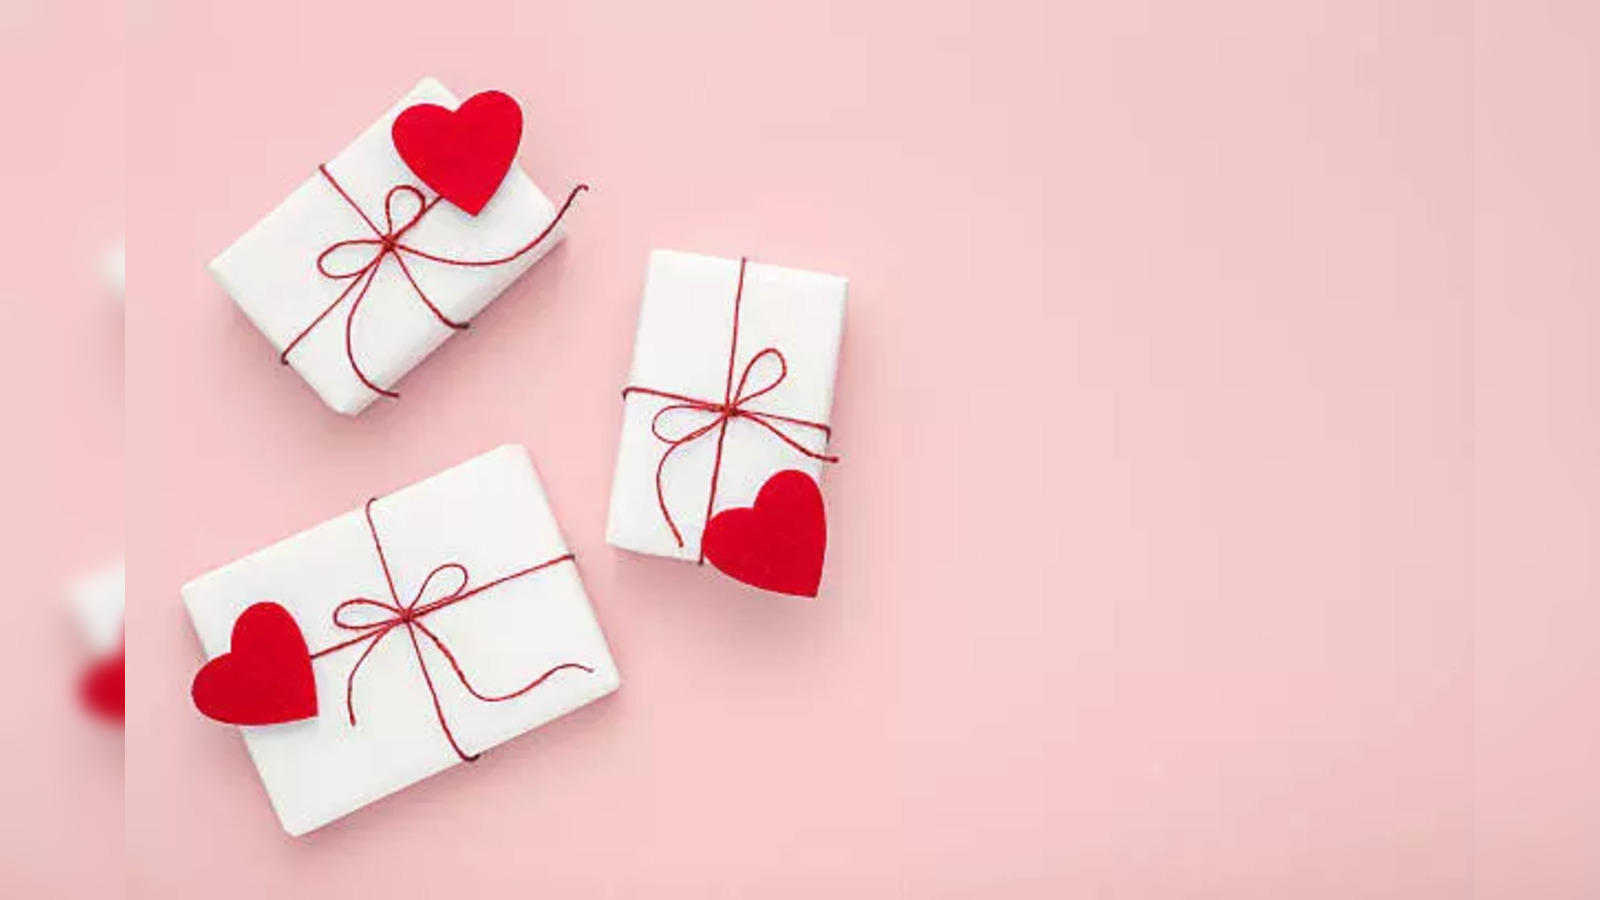 TIED RIBBONS Valentine Gift for Girlfriend Boyfriend Girls Boys Husband  Wife Him Her - Special (Heart Shape Teddy Gift Box with Heart Cushion Card)  - Valentine Day Gift Combo : Amazon.in: Home